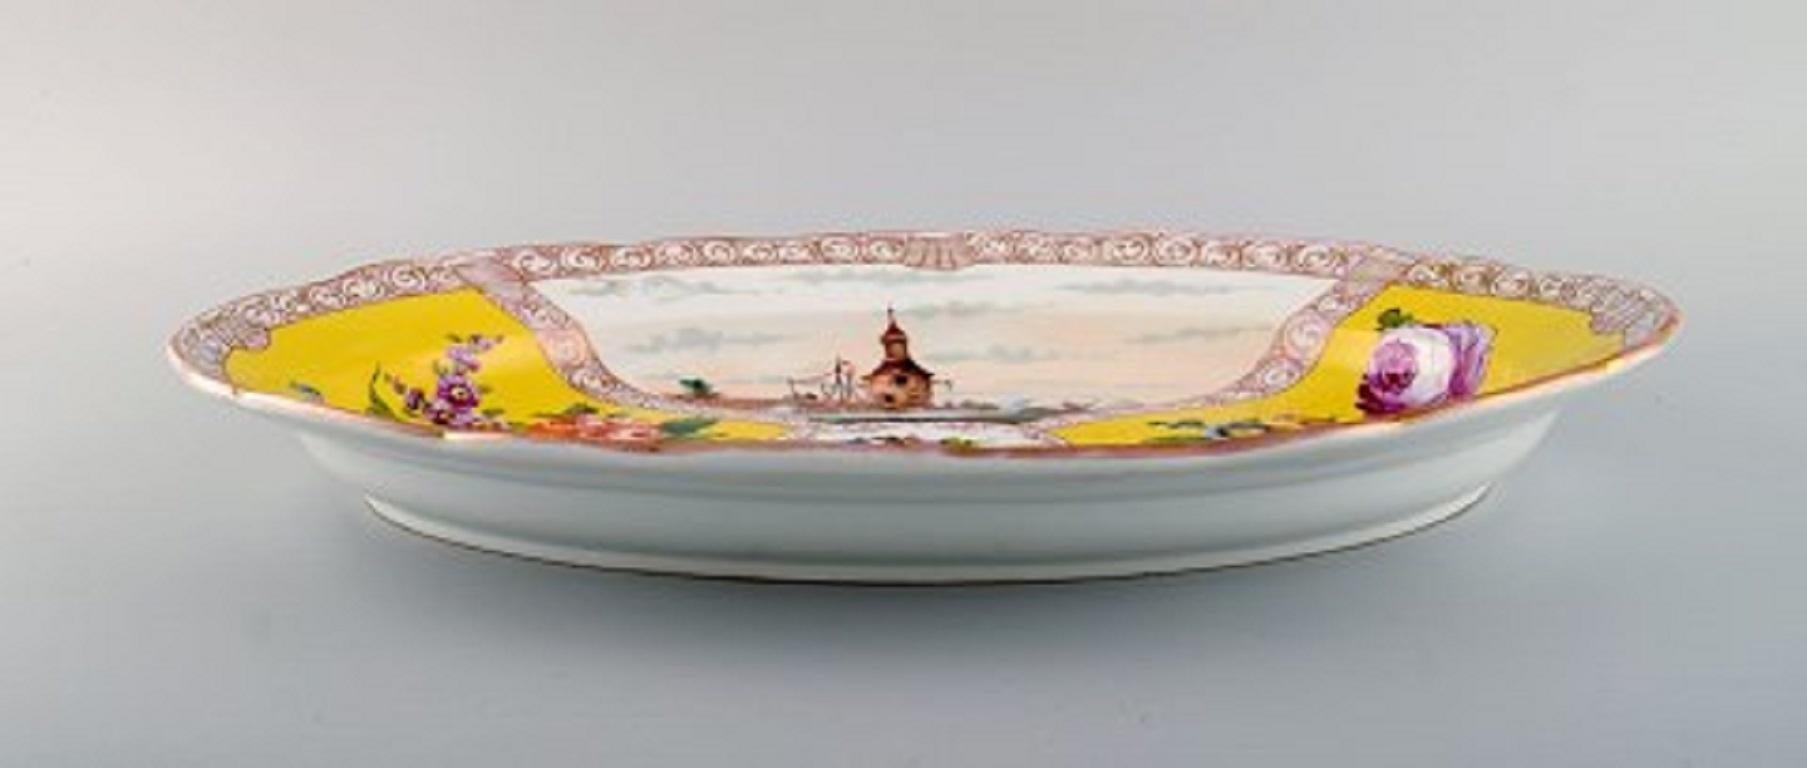 19th Century Large Antique Meissen Serving Dish in Hand-Painted Porcelain, 19th C For Sale